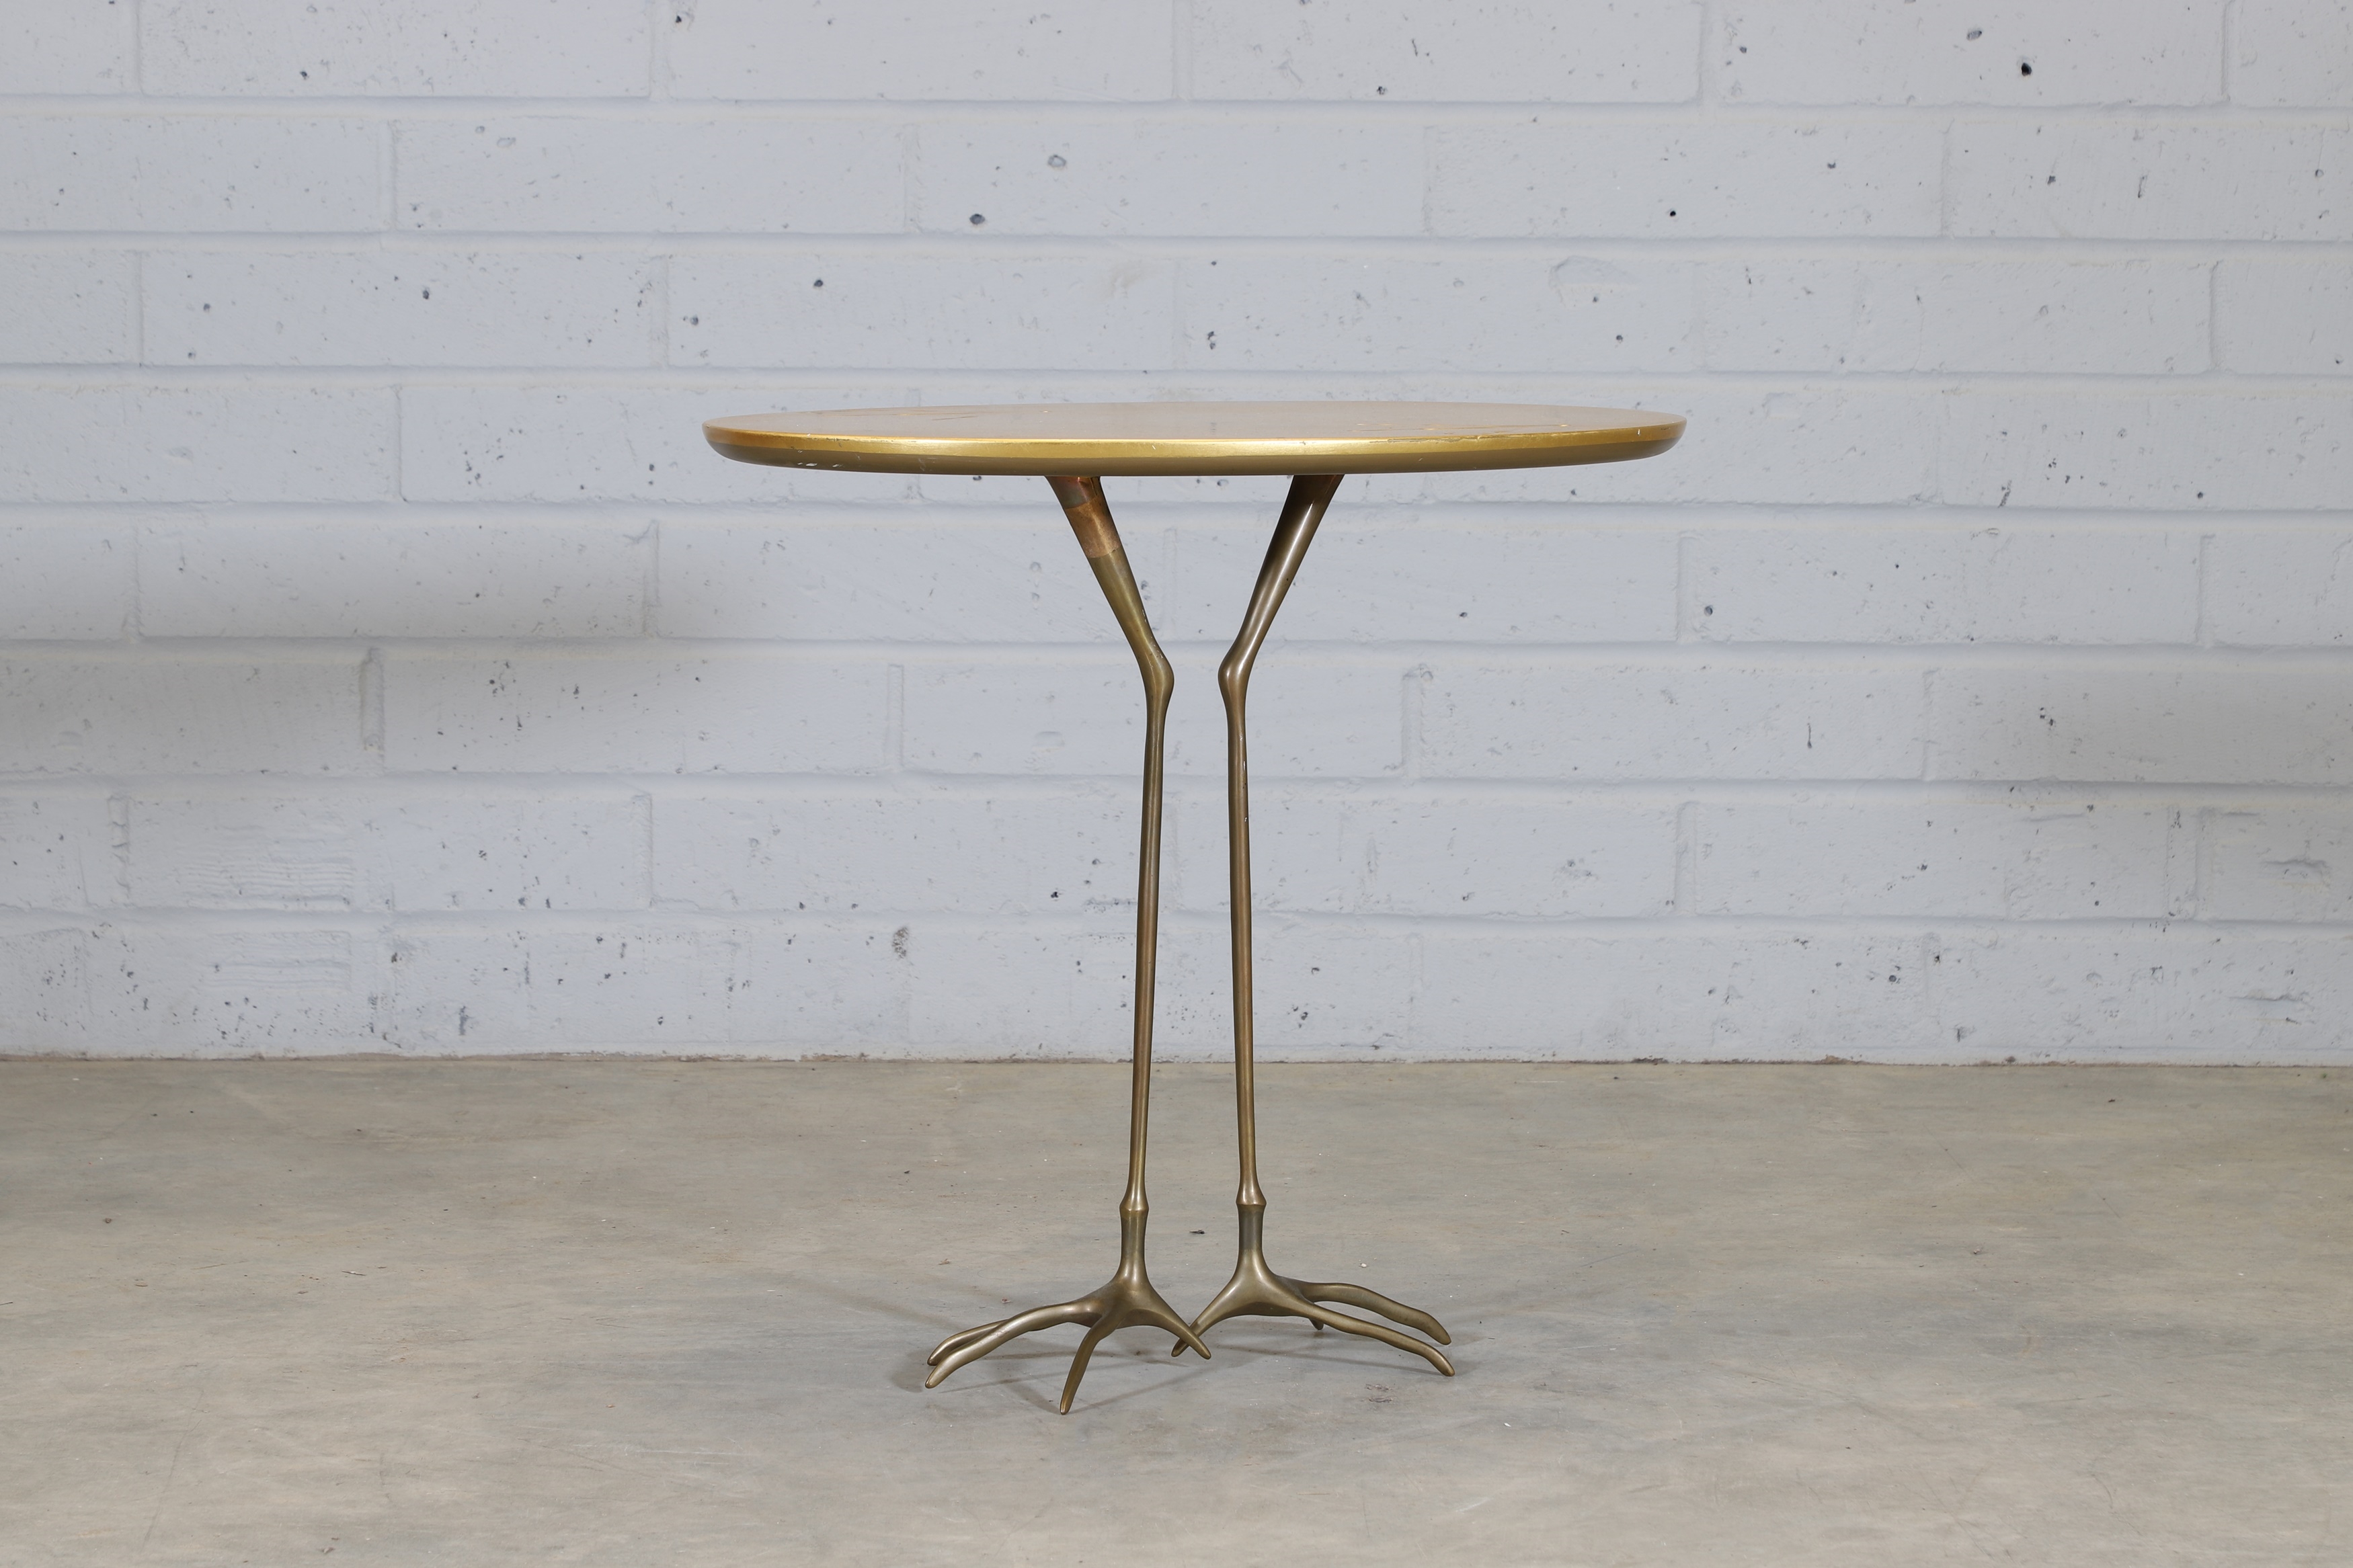 c.1980 designed by Méret Oppenheim in 1939 with an oval gold-leaf top with two footprints raised on cast bronze stork legs - Meret Oppenheim